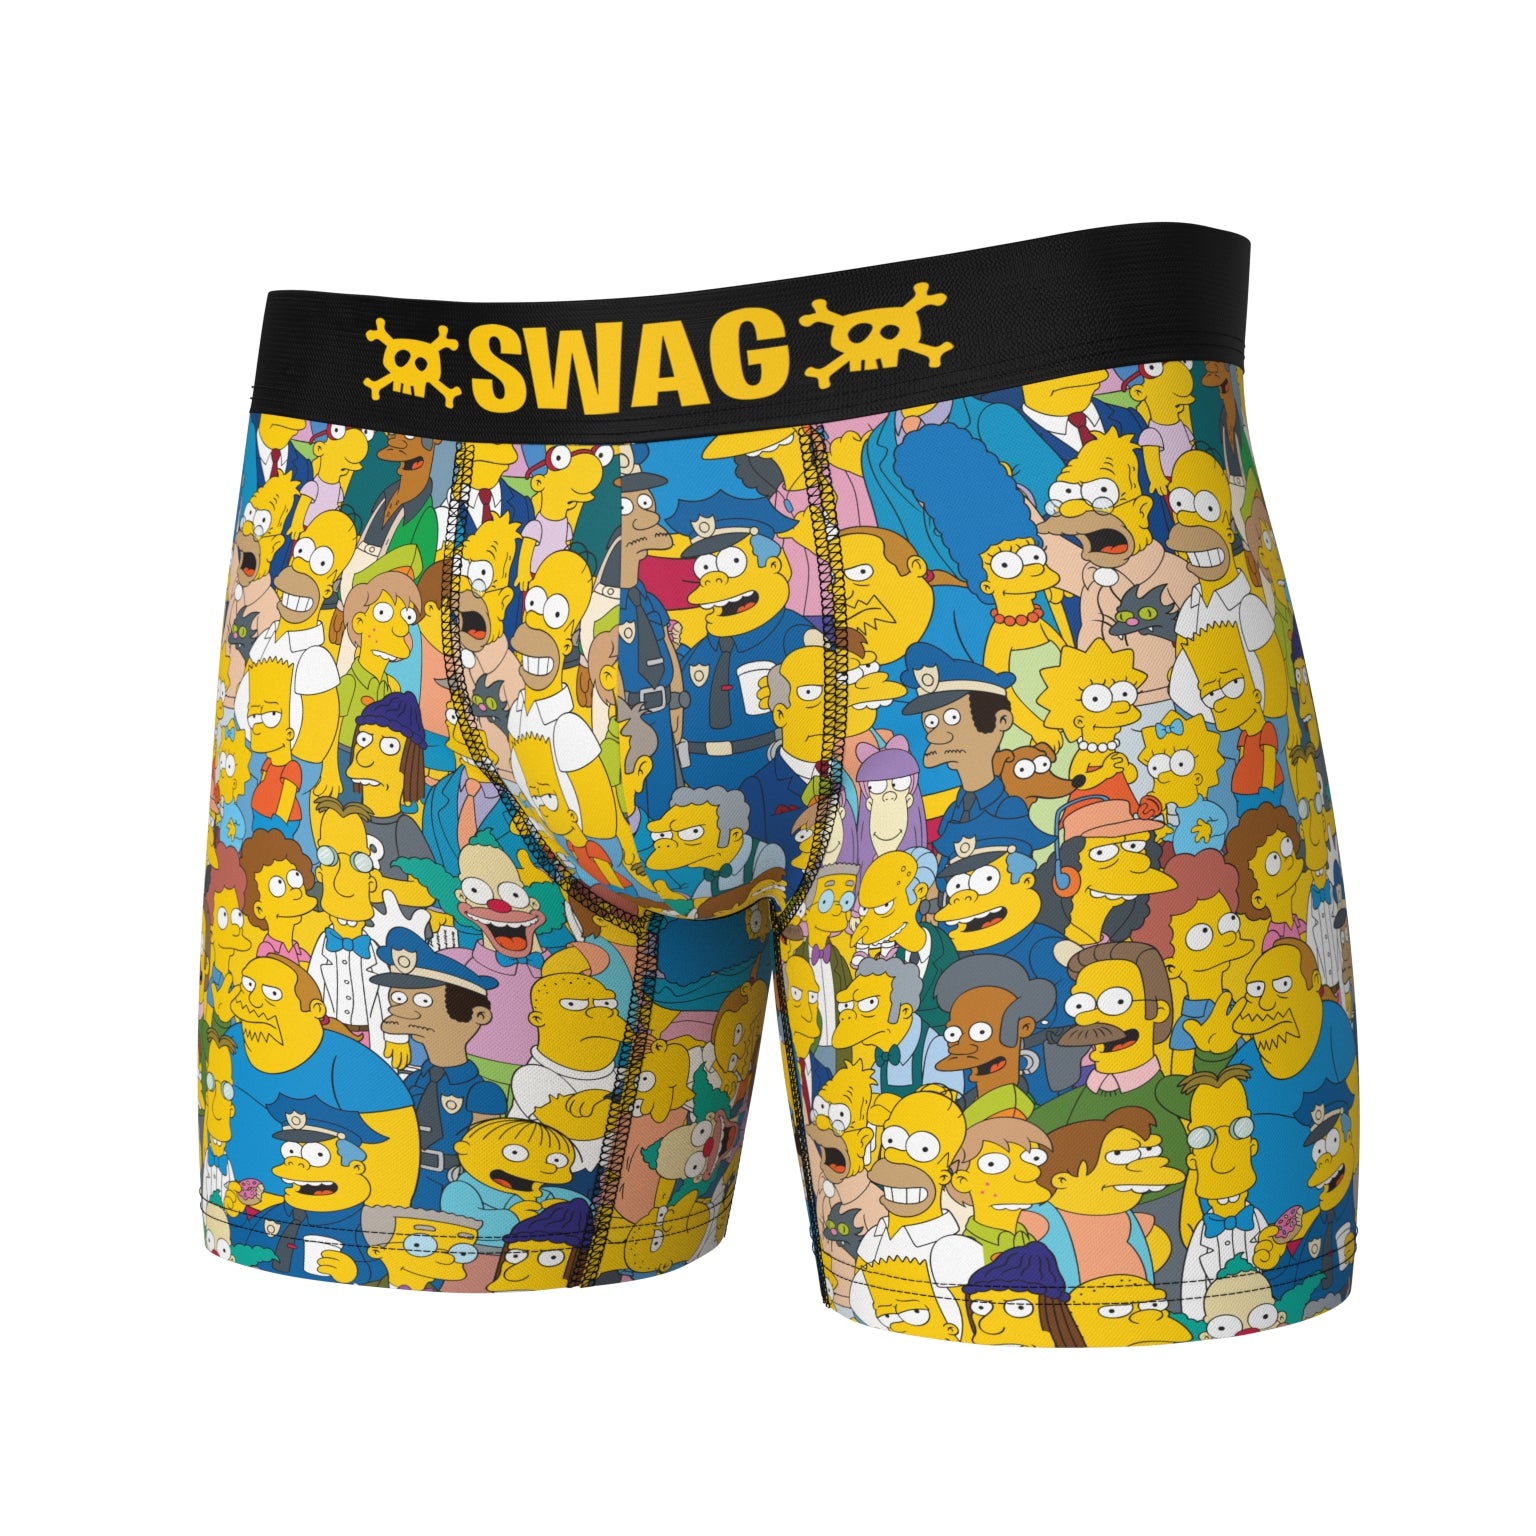 SWAG THE SIMPSONS BOXERS - SPRINGFIELD